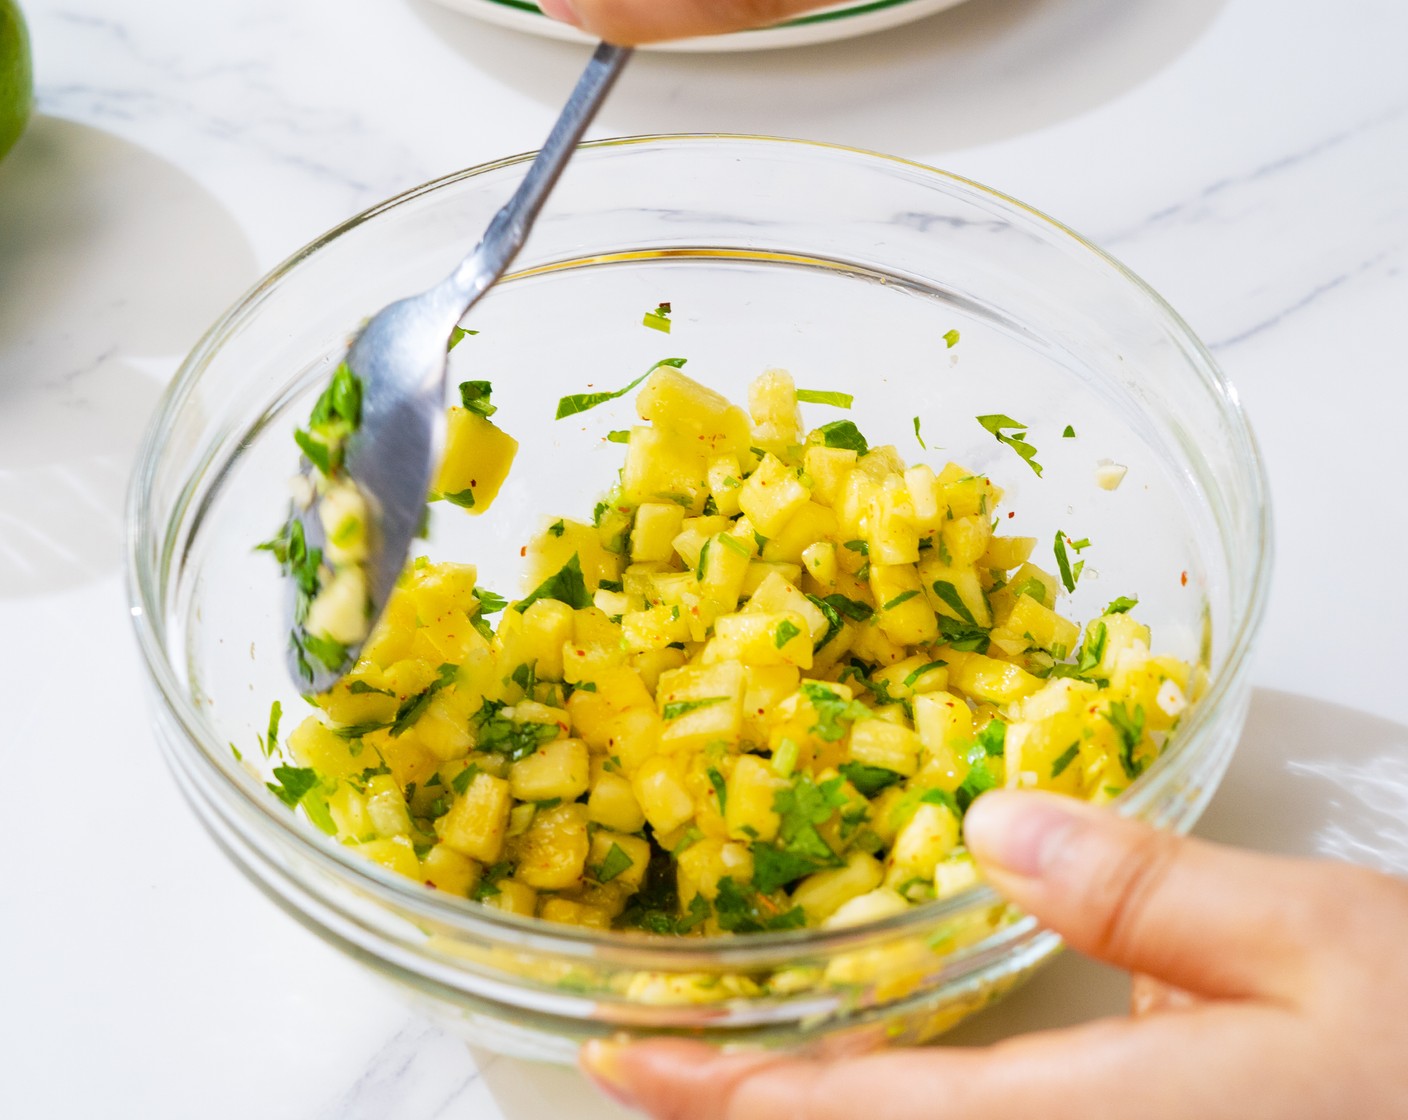 step 1 In a mixing bowl, add Fresh Cilantro (1 bunch), Garlic (1 clove), Pineapple (1 cup), Lime (1/2), Brown Sugar (1 tsp), Fish Sauce (1/2 tsp), and Tajin (1/4 tsp). Mix well, then cover and keep in the fridge.